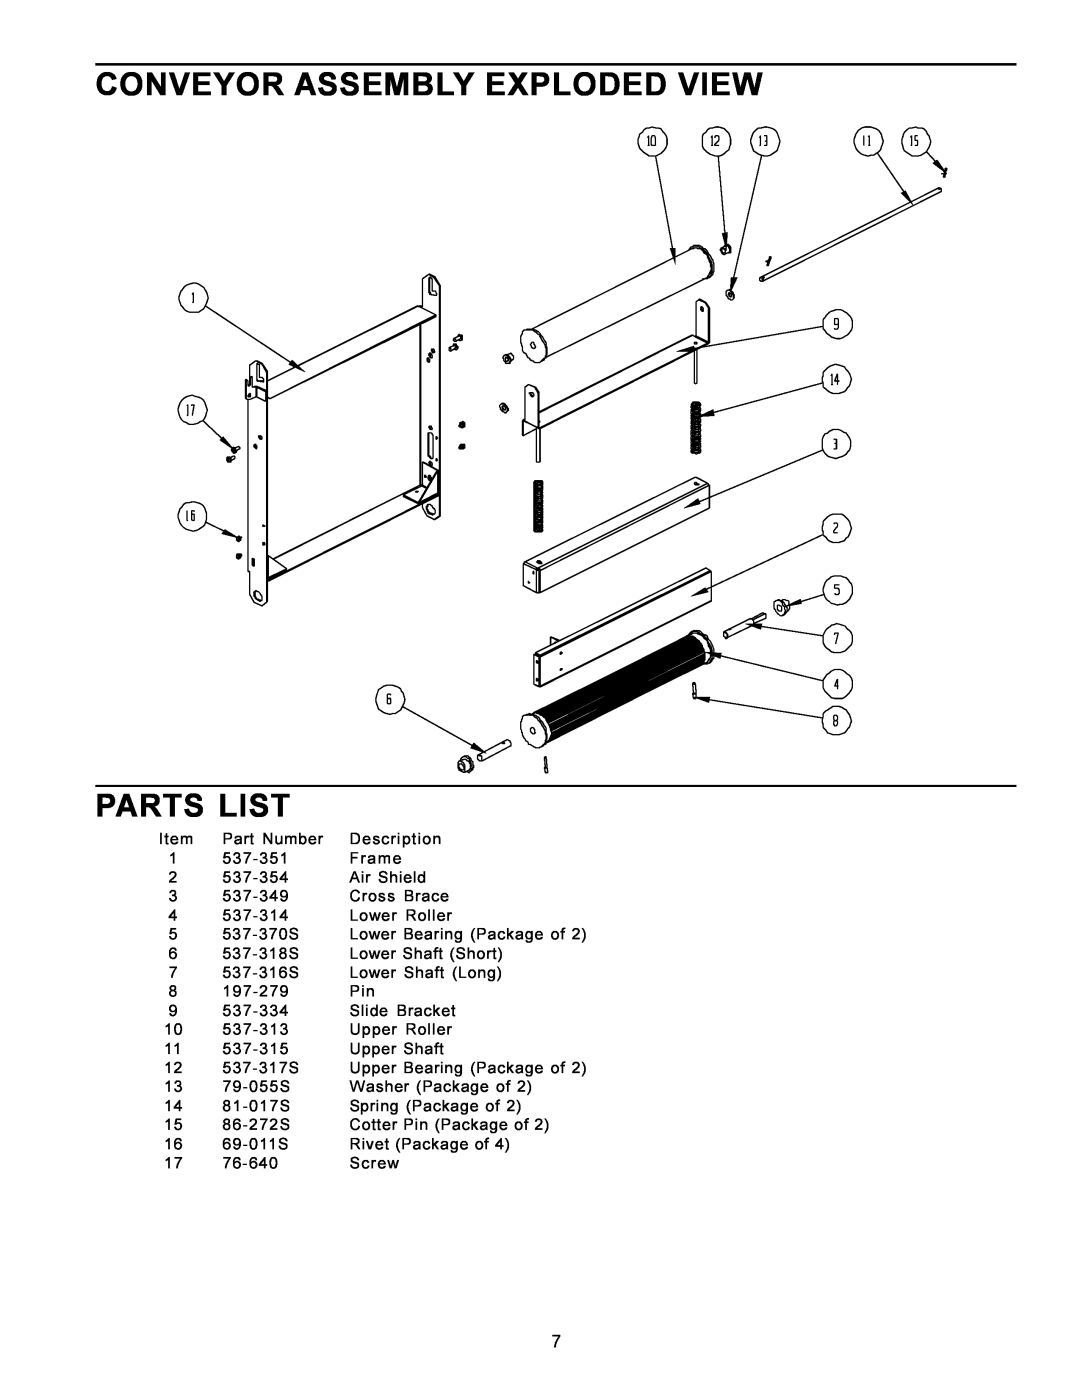 Prince Castle TX Series operating instructions Conveyor Assembly Exploded View Parts List 